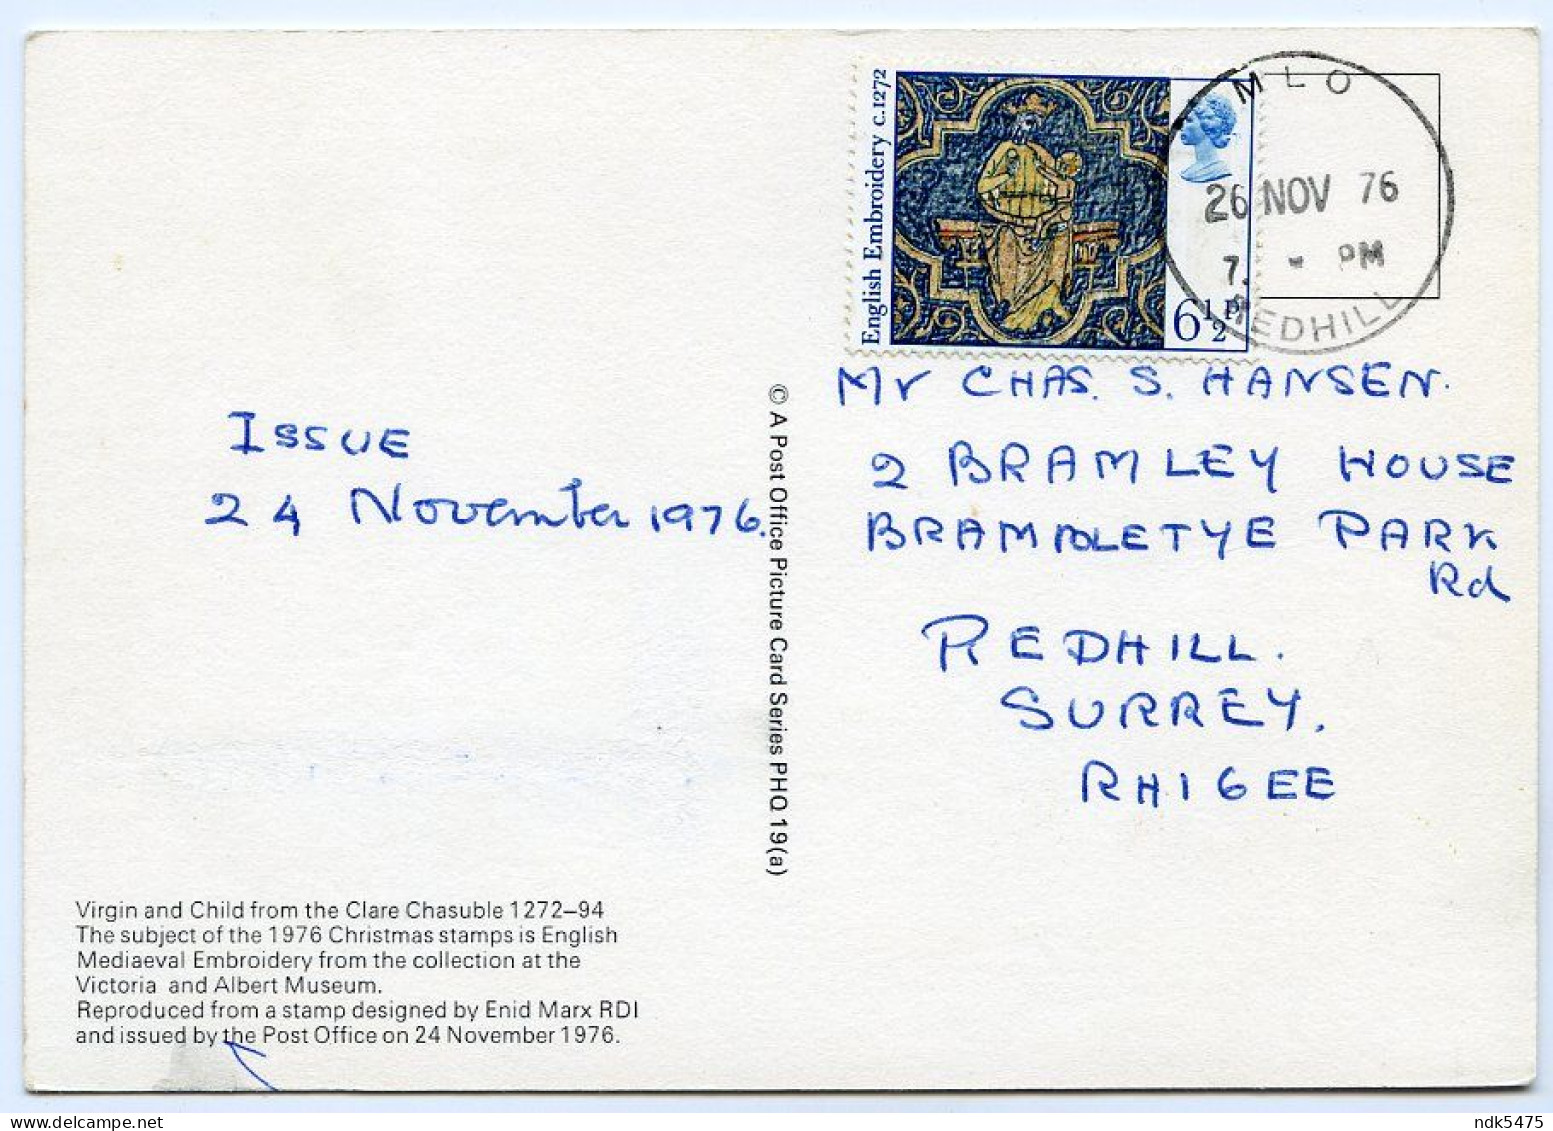 POSTMARK : MLO REDHILL, 1976 / VICTORIA AND ALBERT MUSEUM PHQ - VIRGIN AND CHILD  (10 X 15cms Approx.) - Cartes PHQ